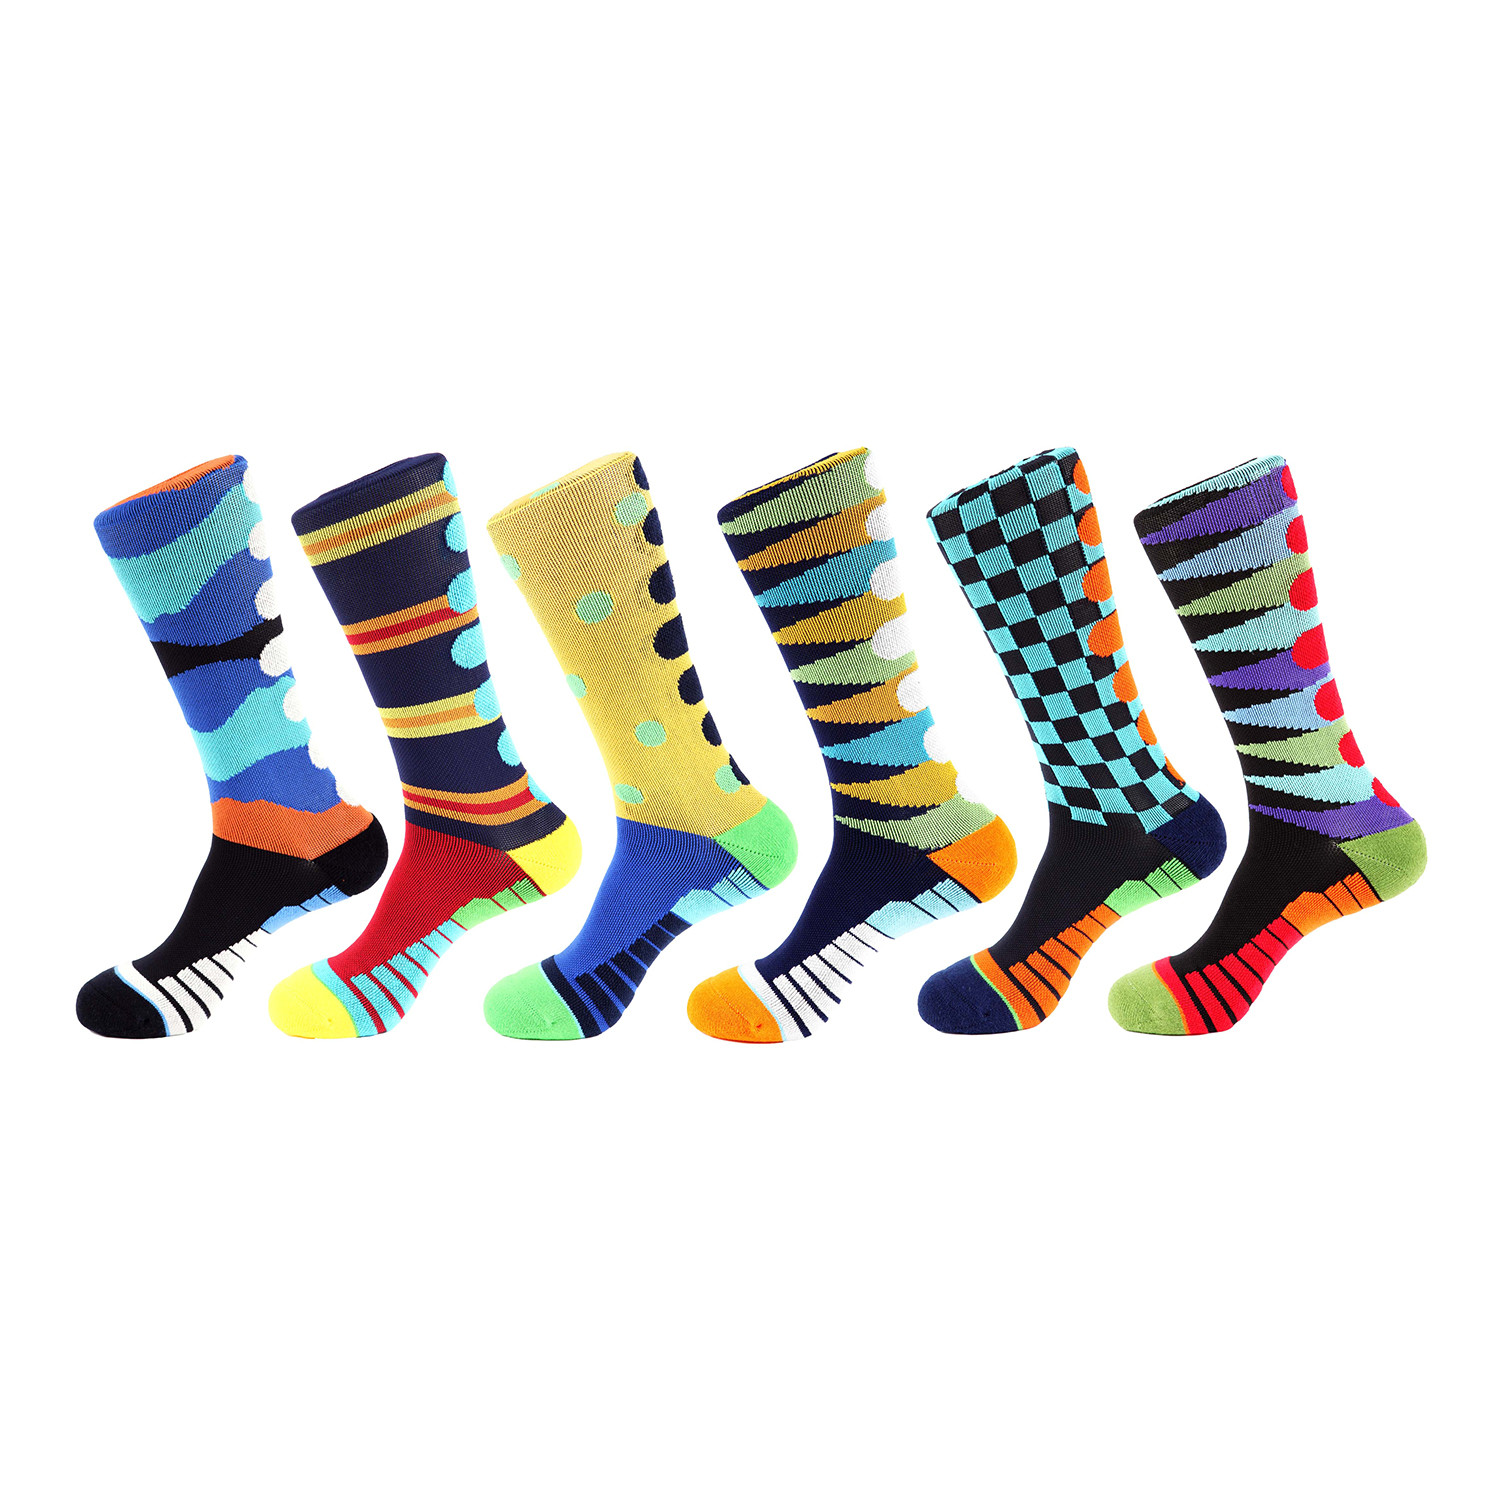 Stride Athletic Socks IV // Multicolor // Pack of 6 - Unsimply Stitched ...